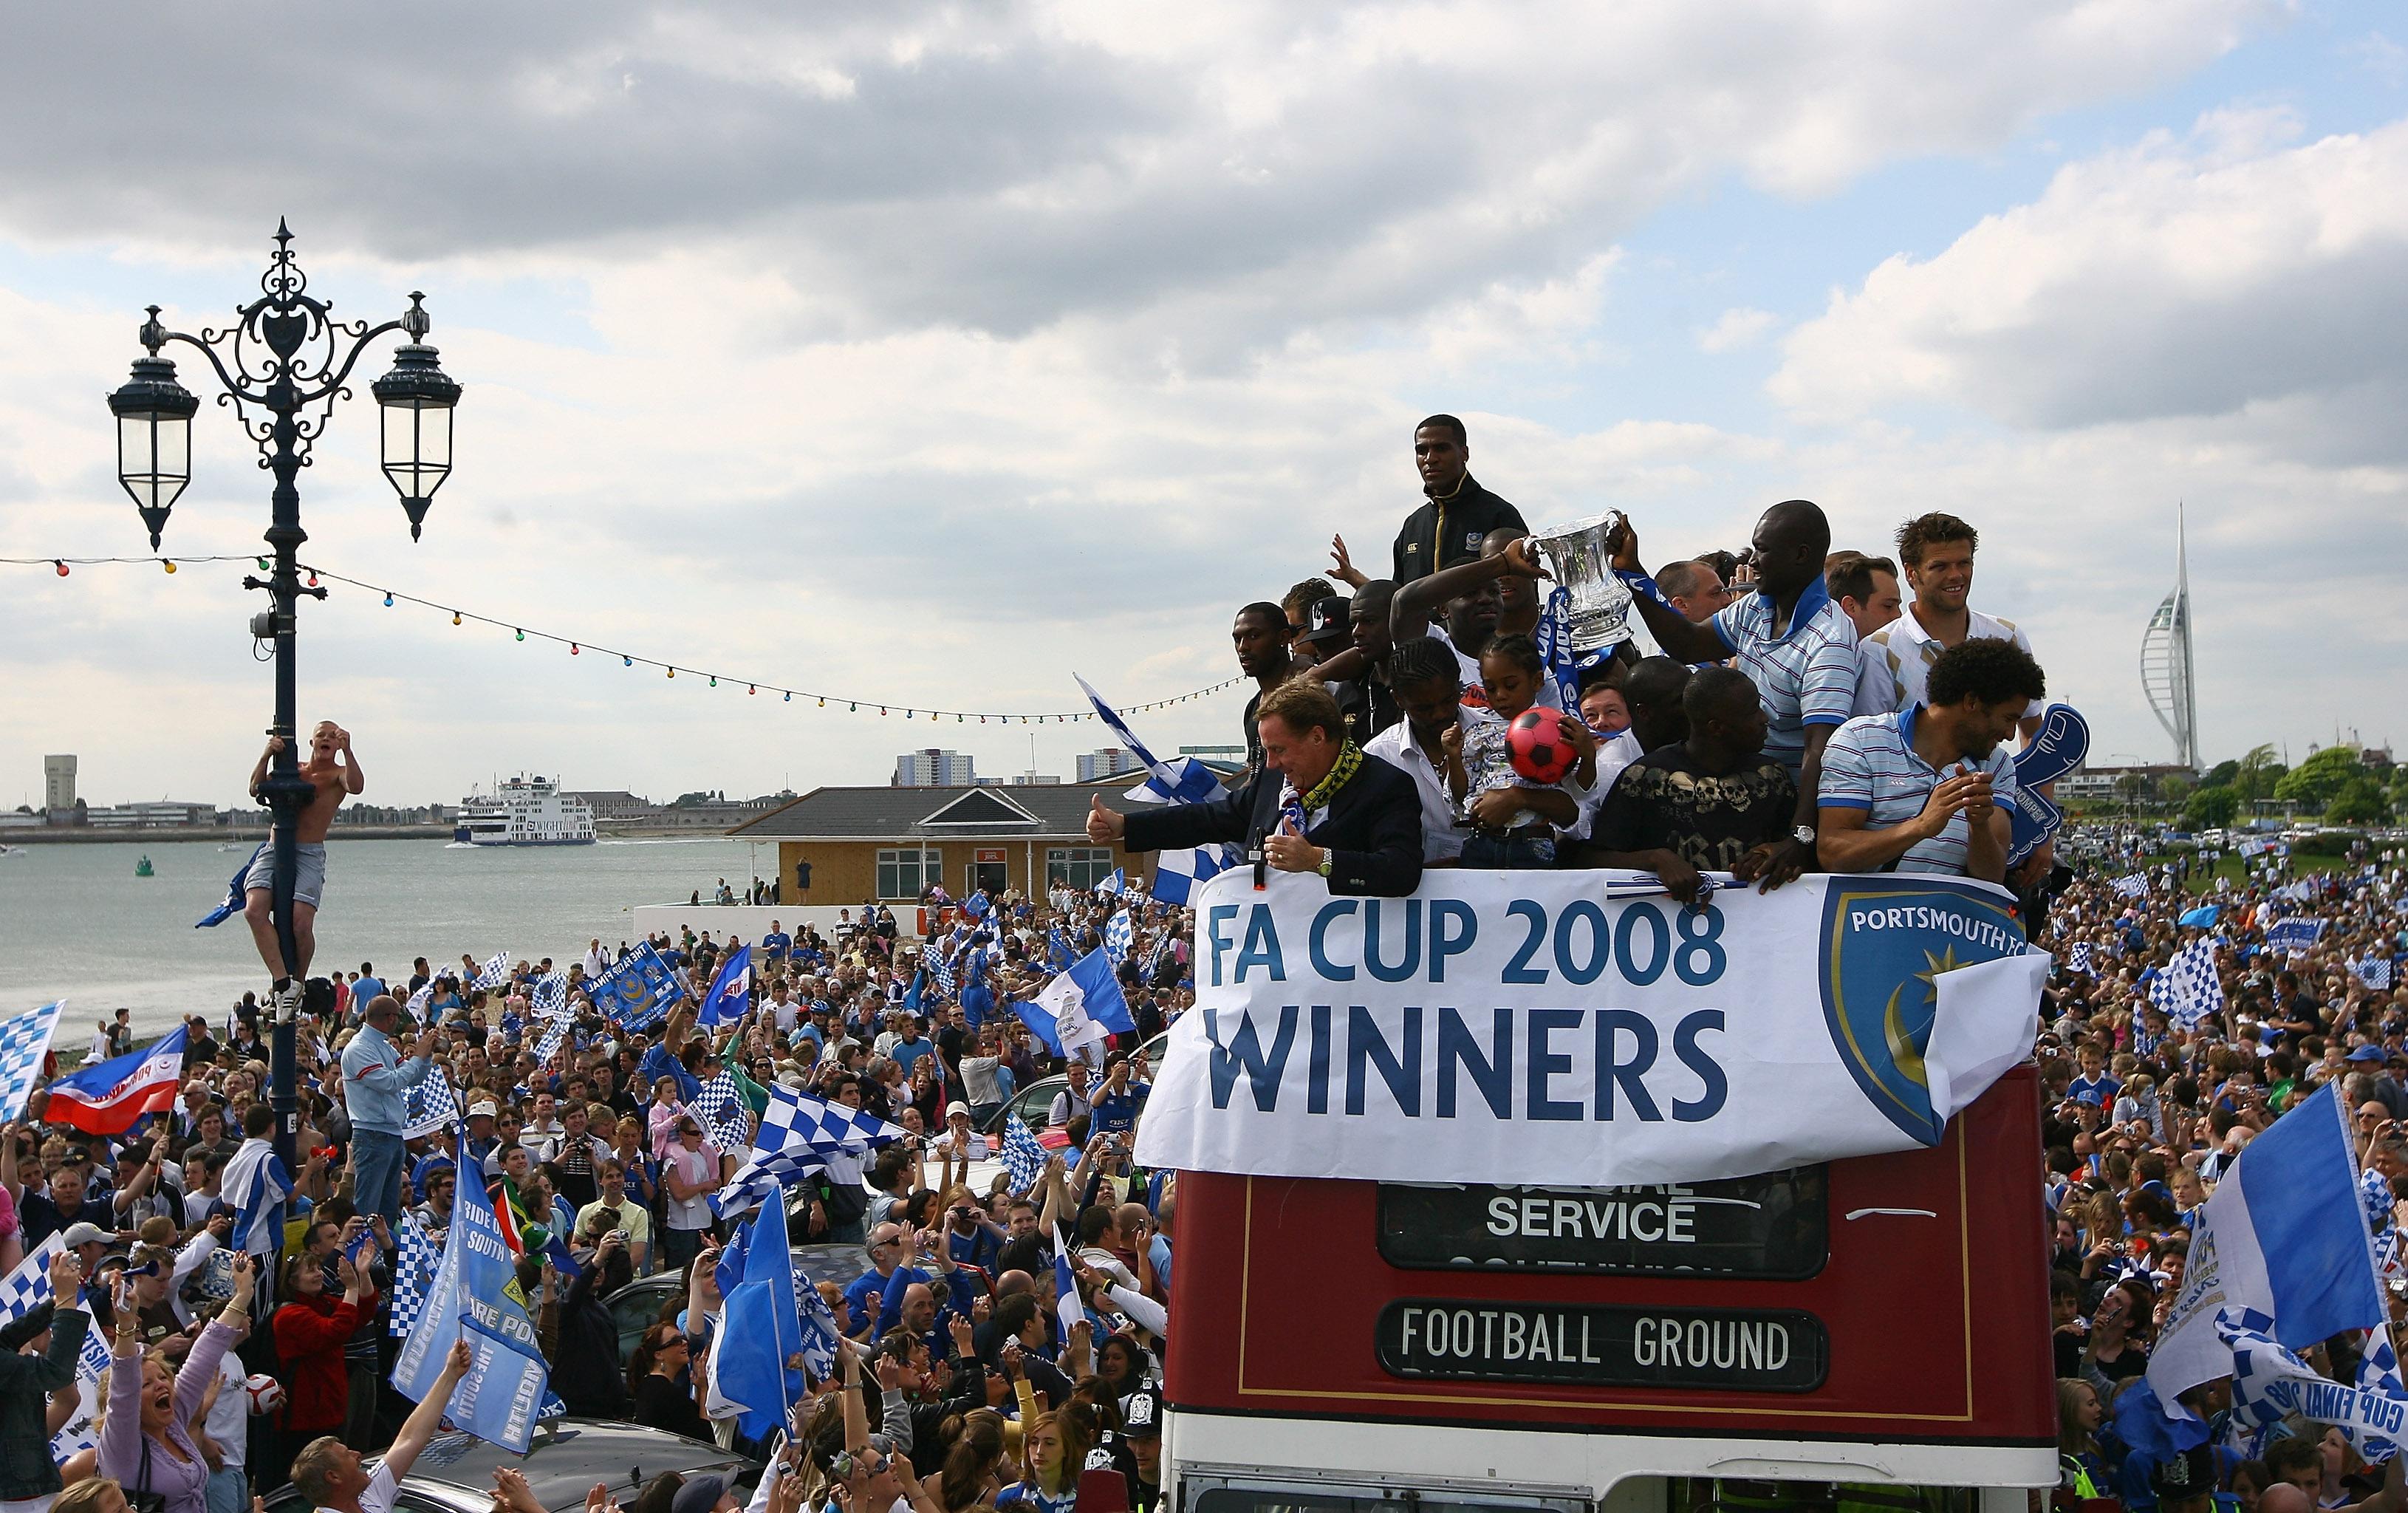 Portsmouth FA Cup Final Parade